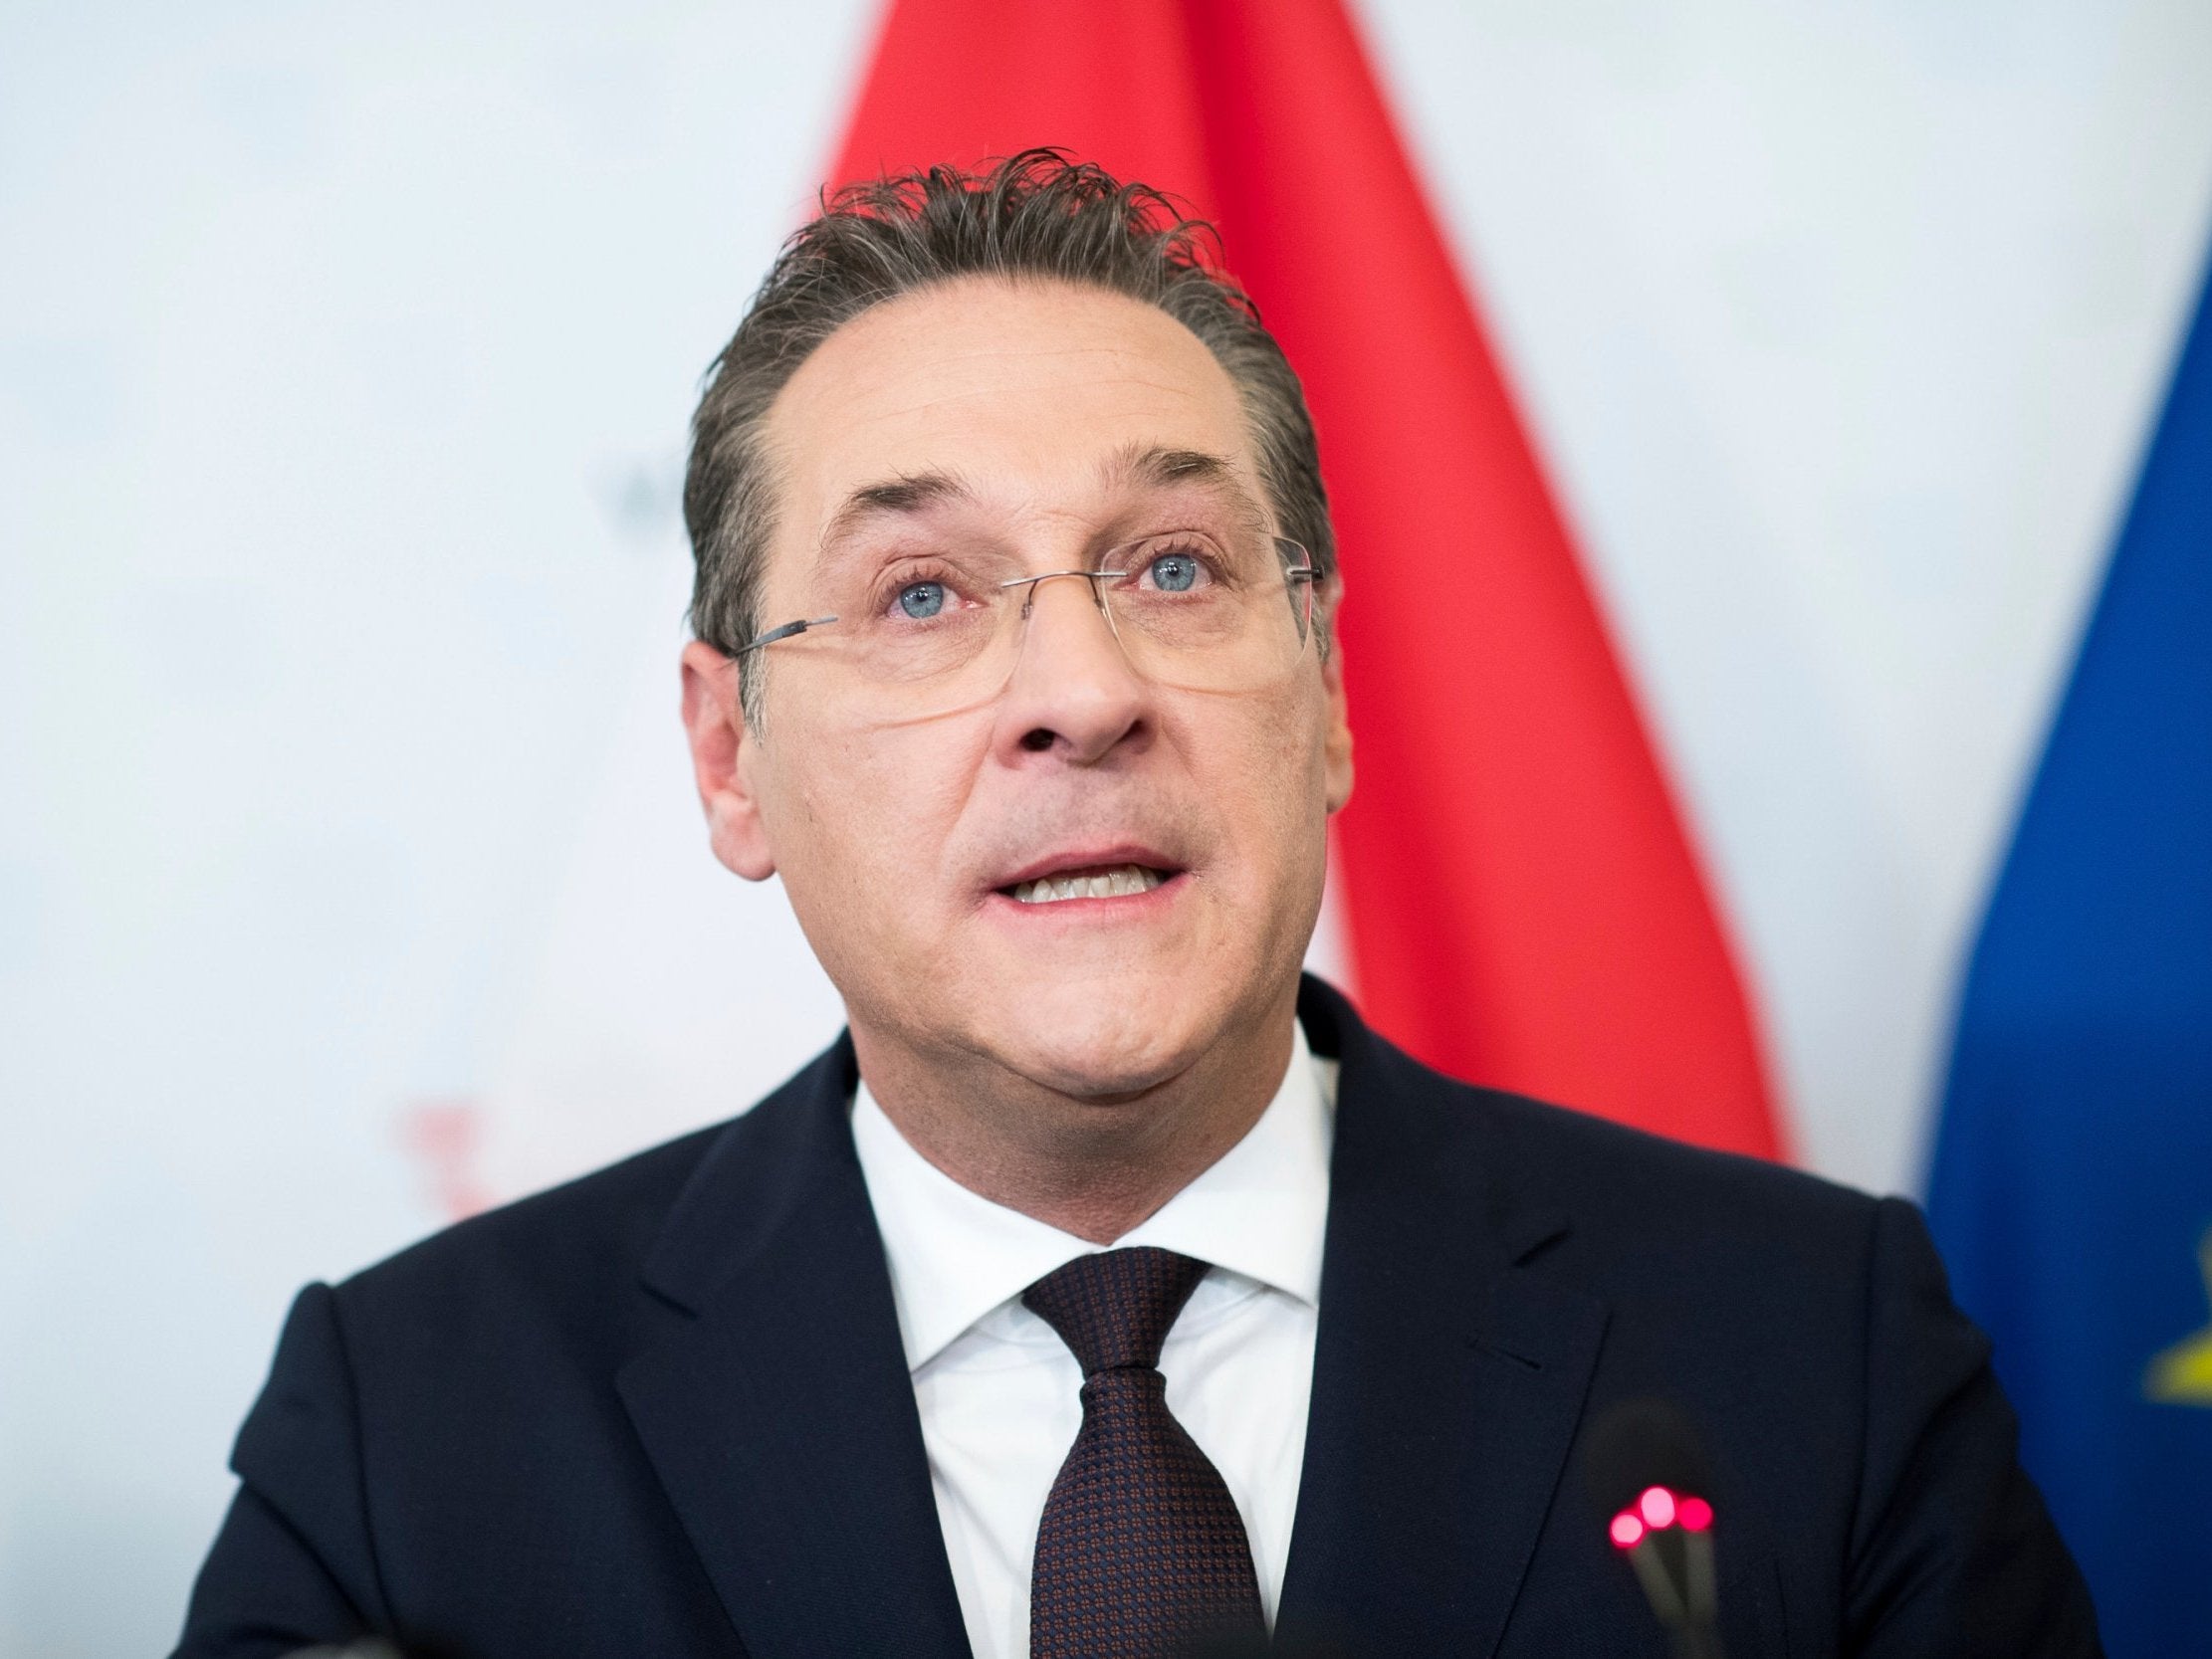 Austria to hold snap election after vice chancellor resigns in ‘corruption video scandal’